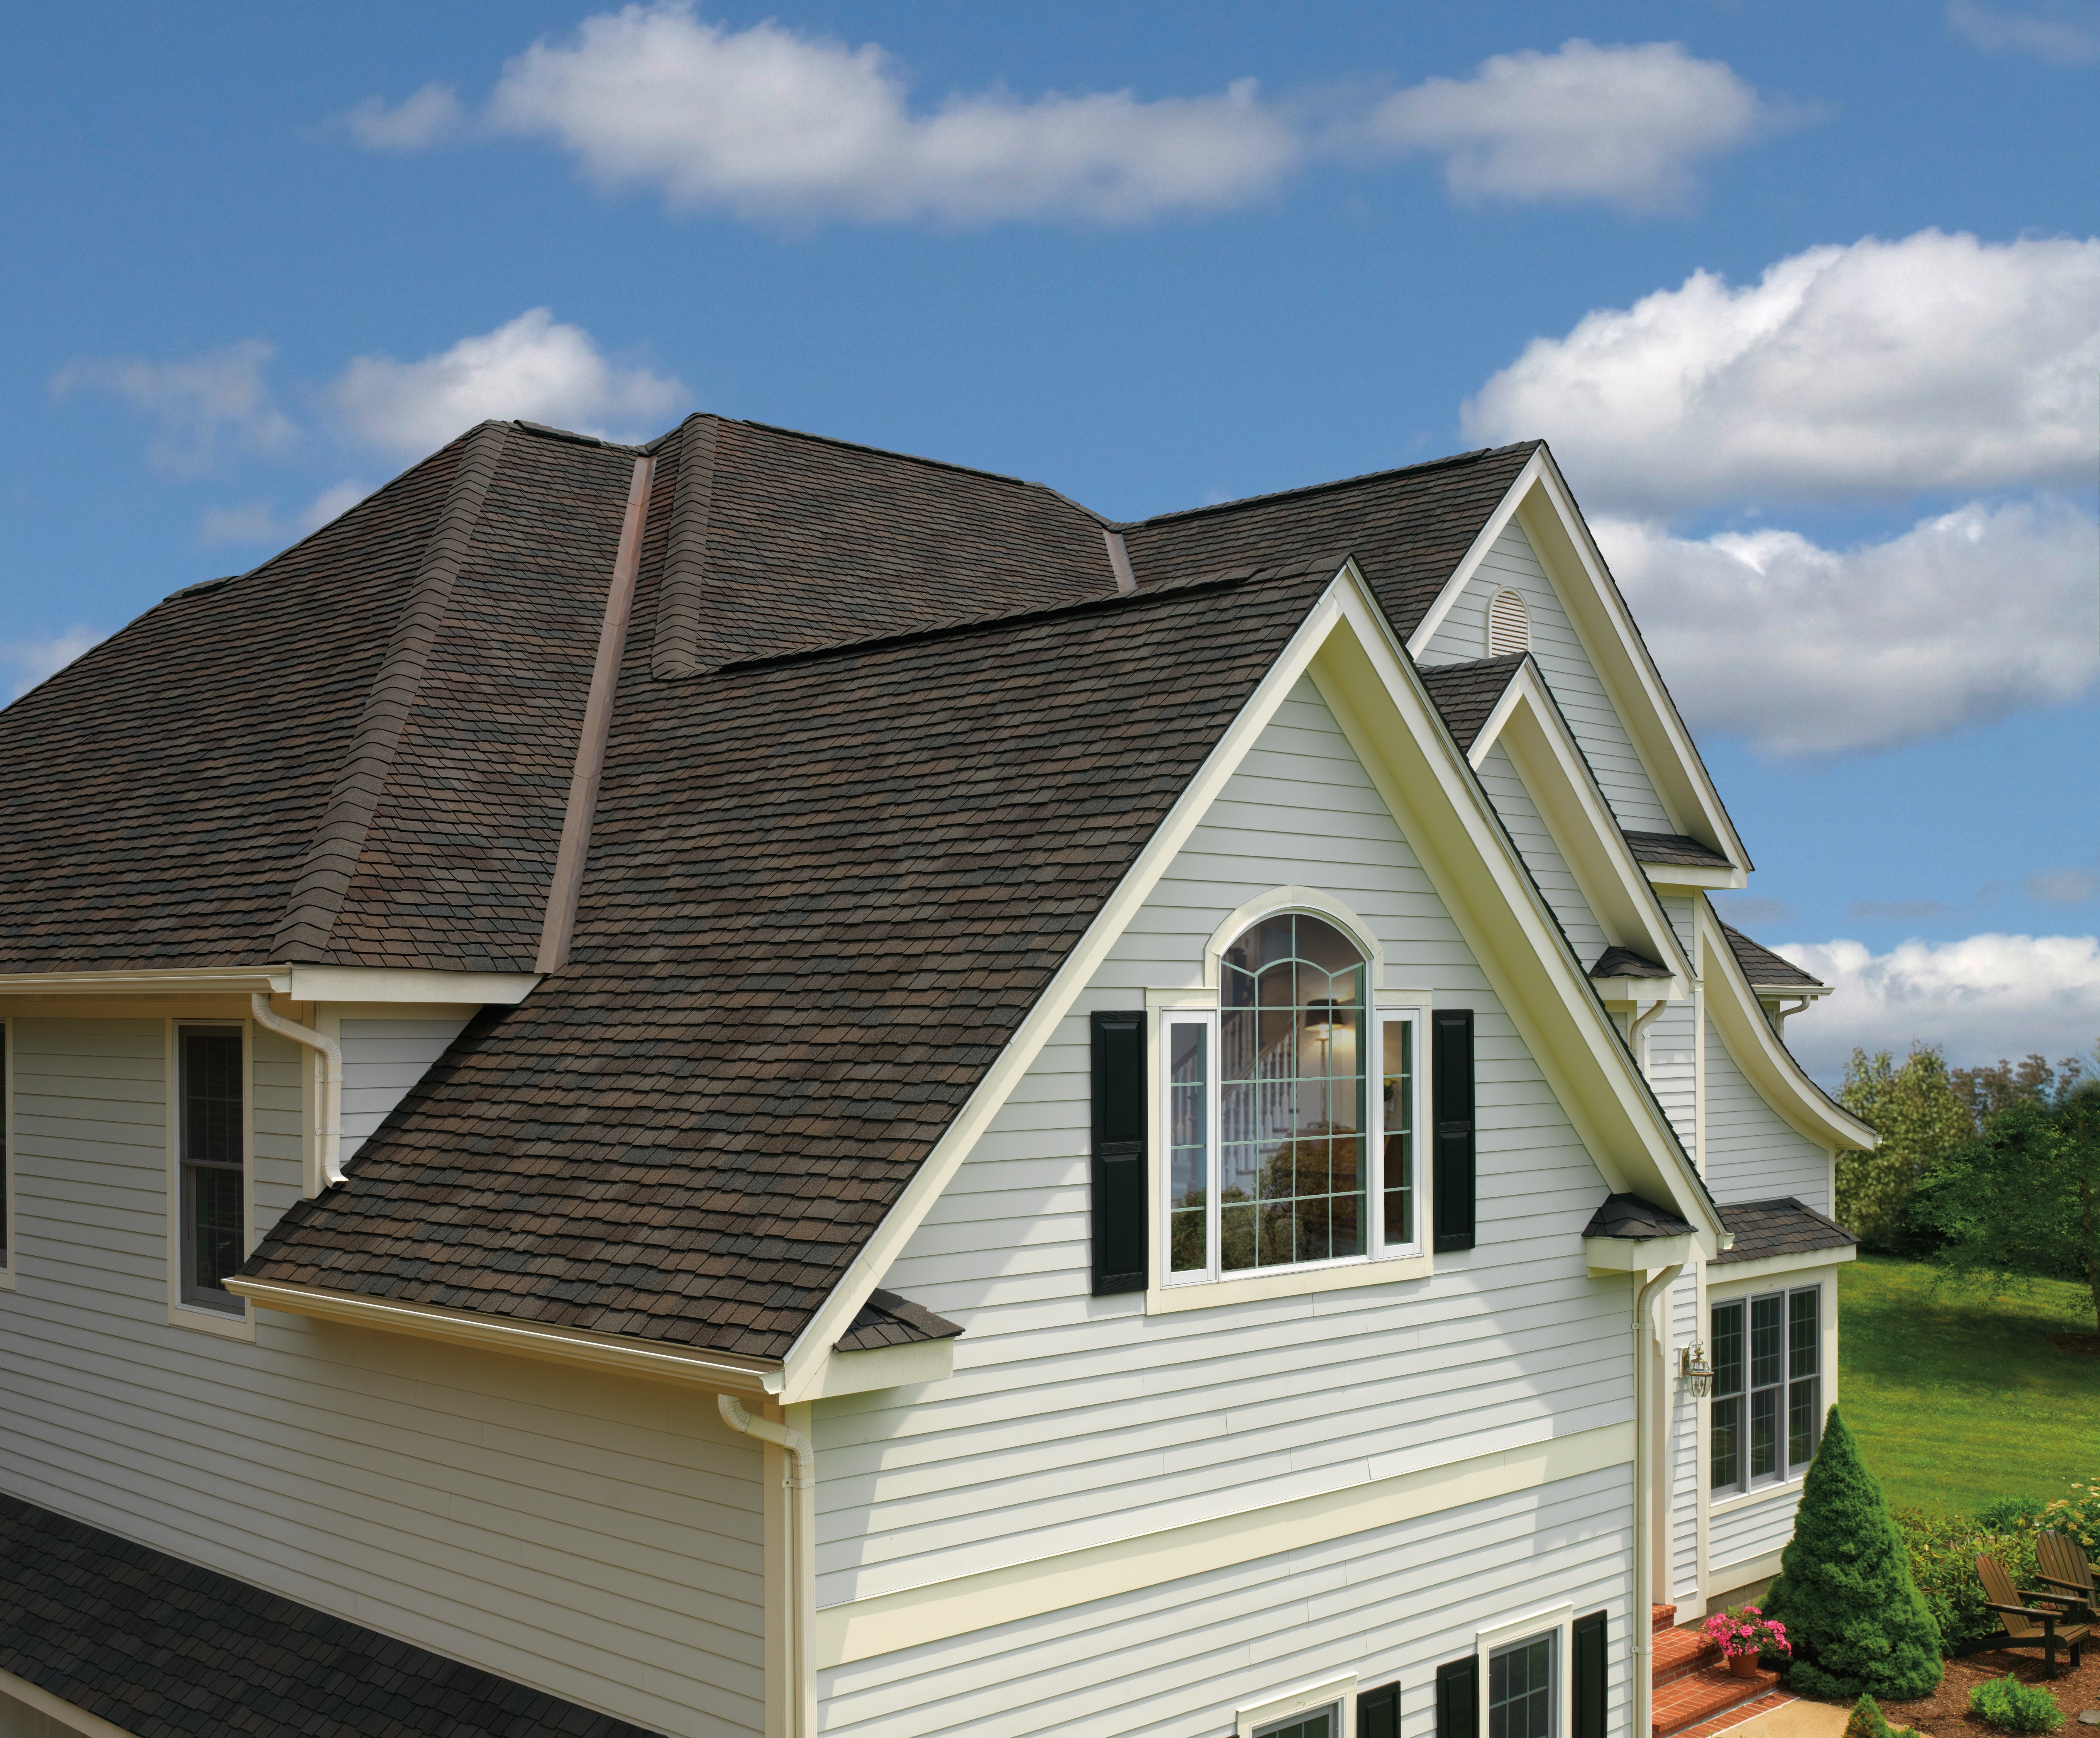 A dark brown roof on light beige siding for a striking exterior remodel